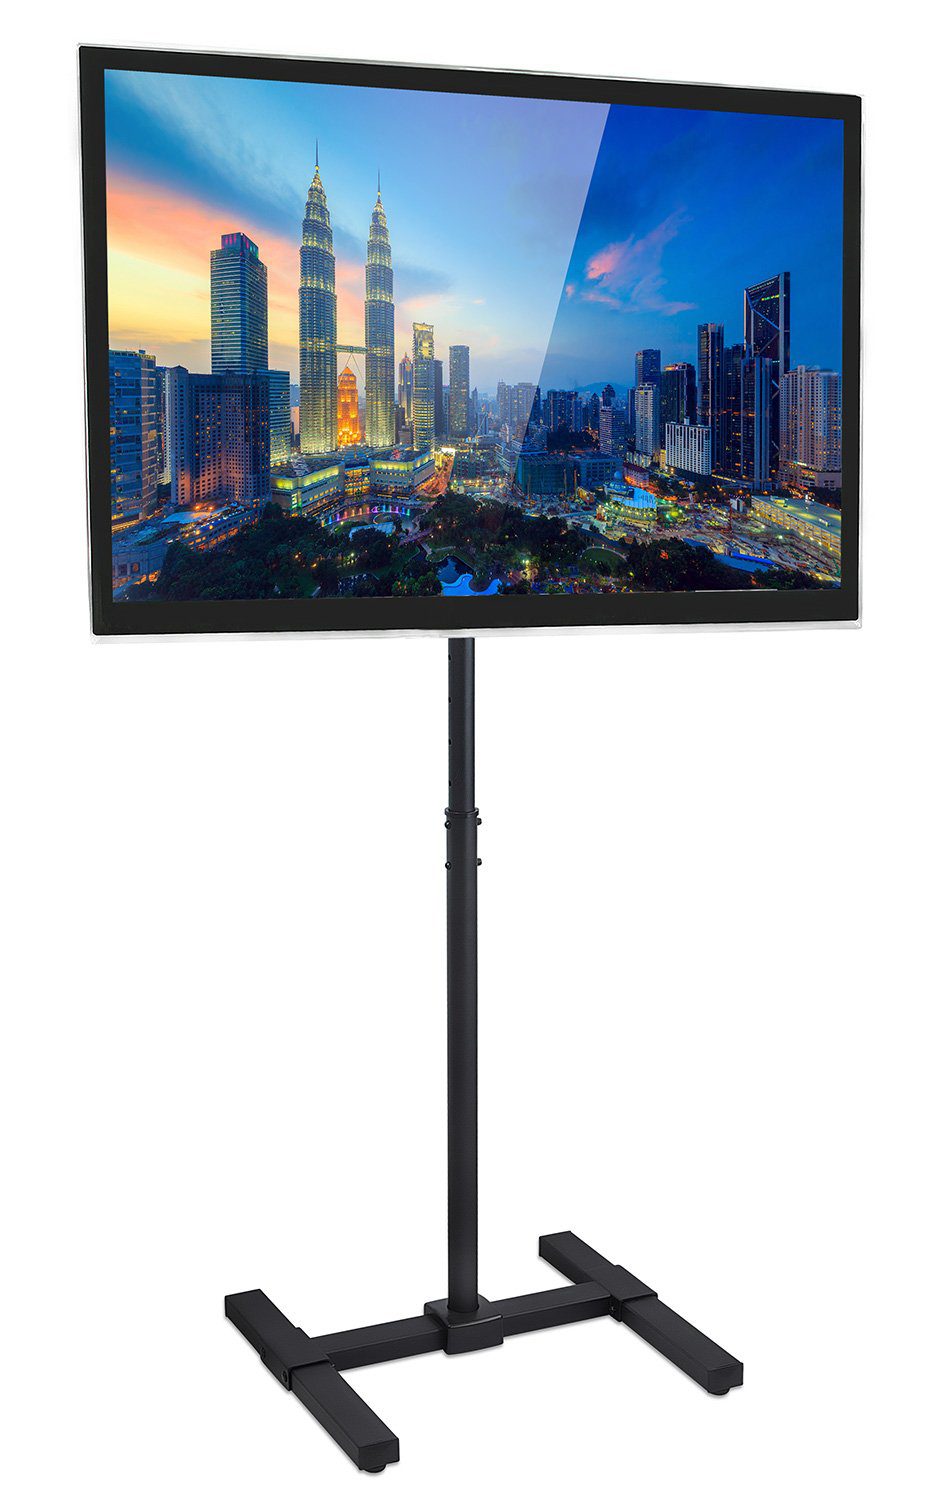 How to Mount a Tv on a Floor Stand